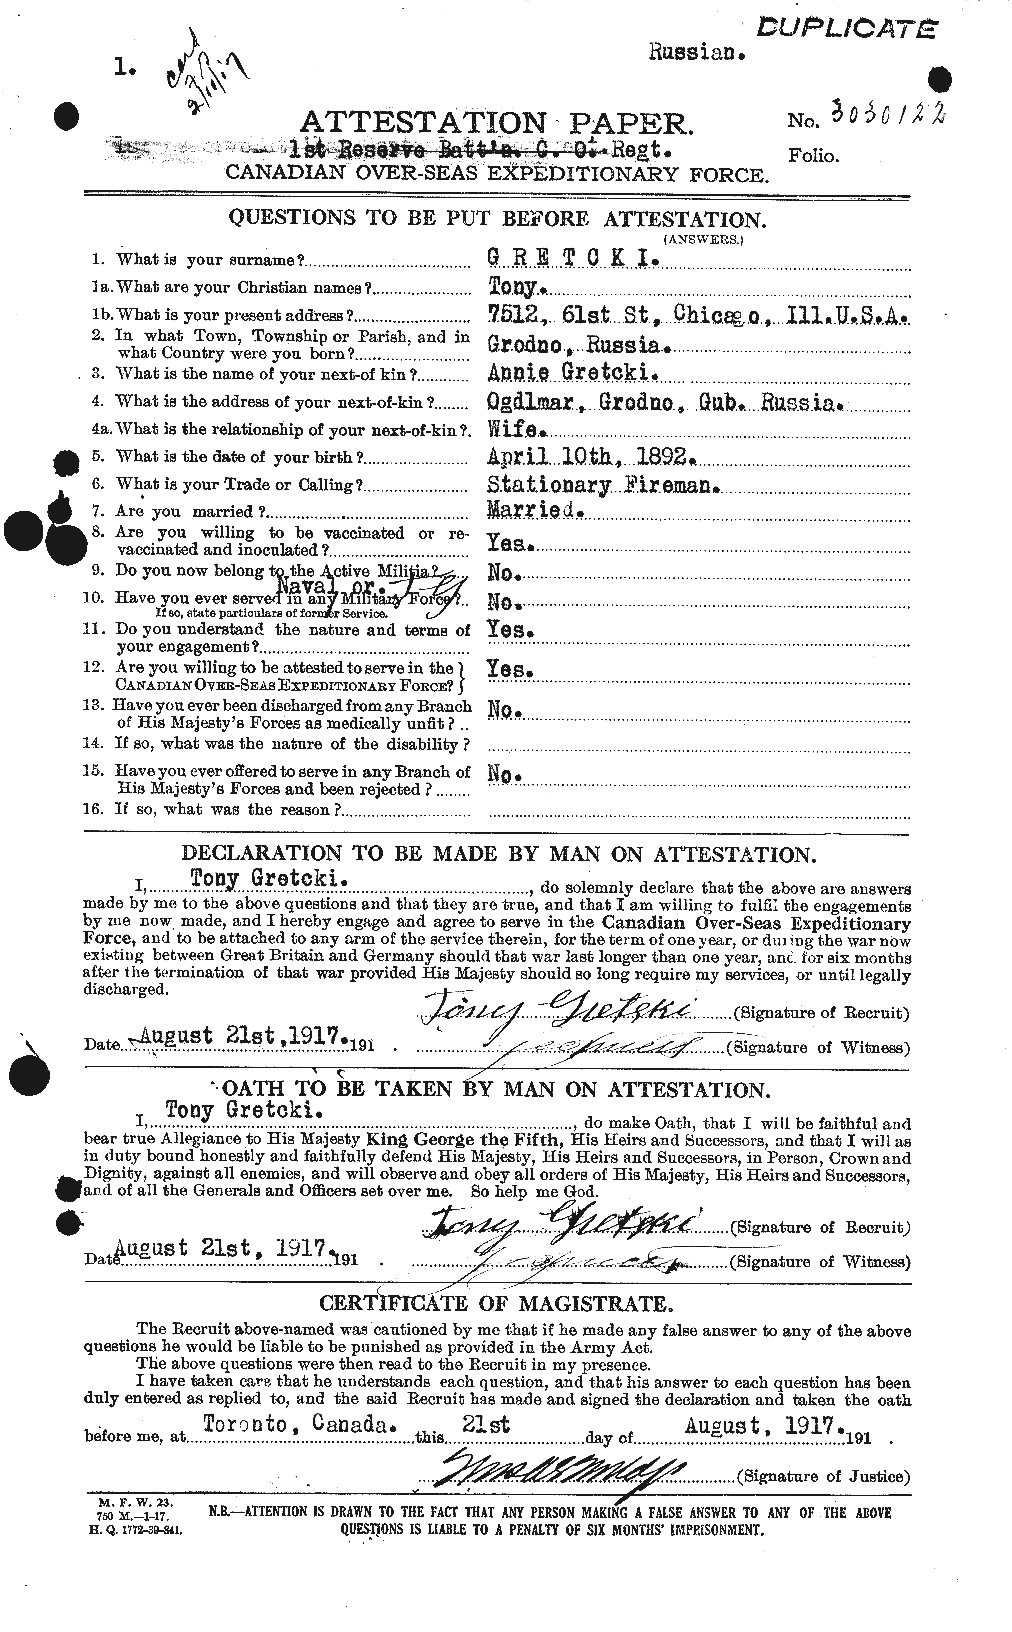 Personnel Records of the First World War - CEF 366997a